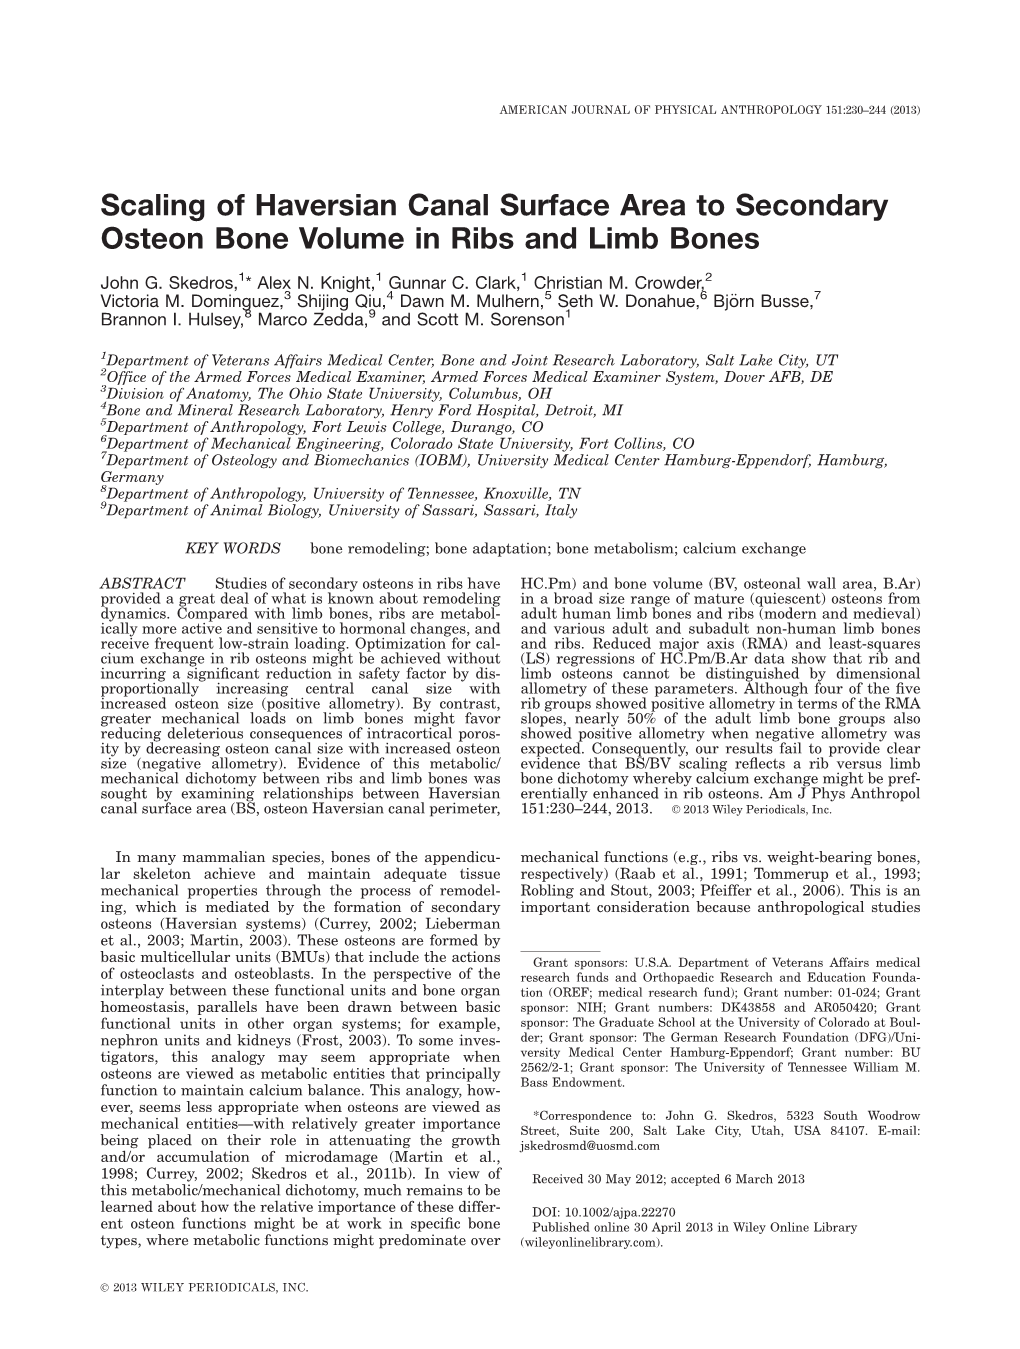 Scaling of Haversian Canal Surface Area to Secondary Osteon Bone Volume in Ribs and Limb Bones